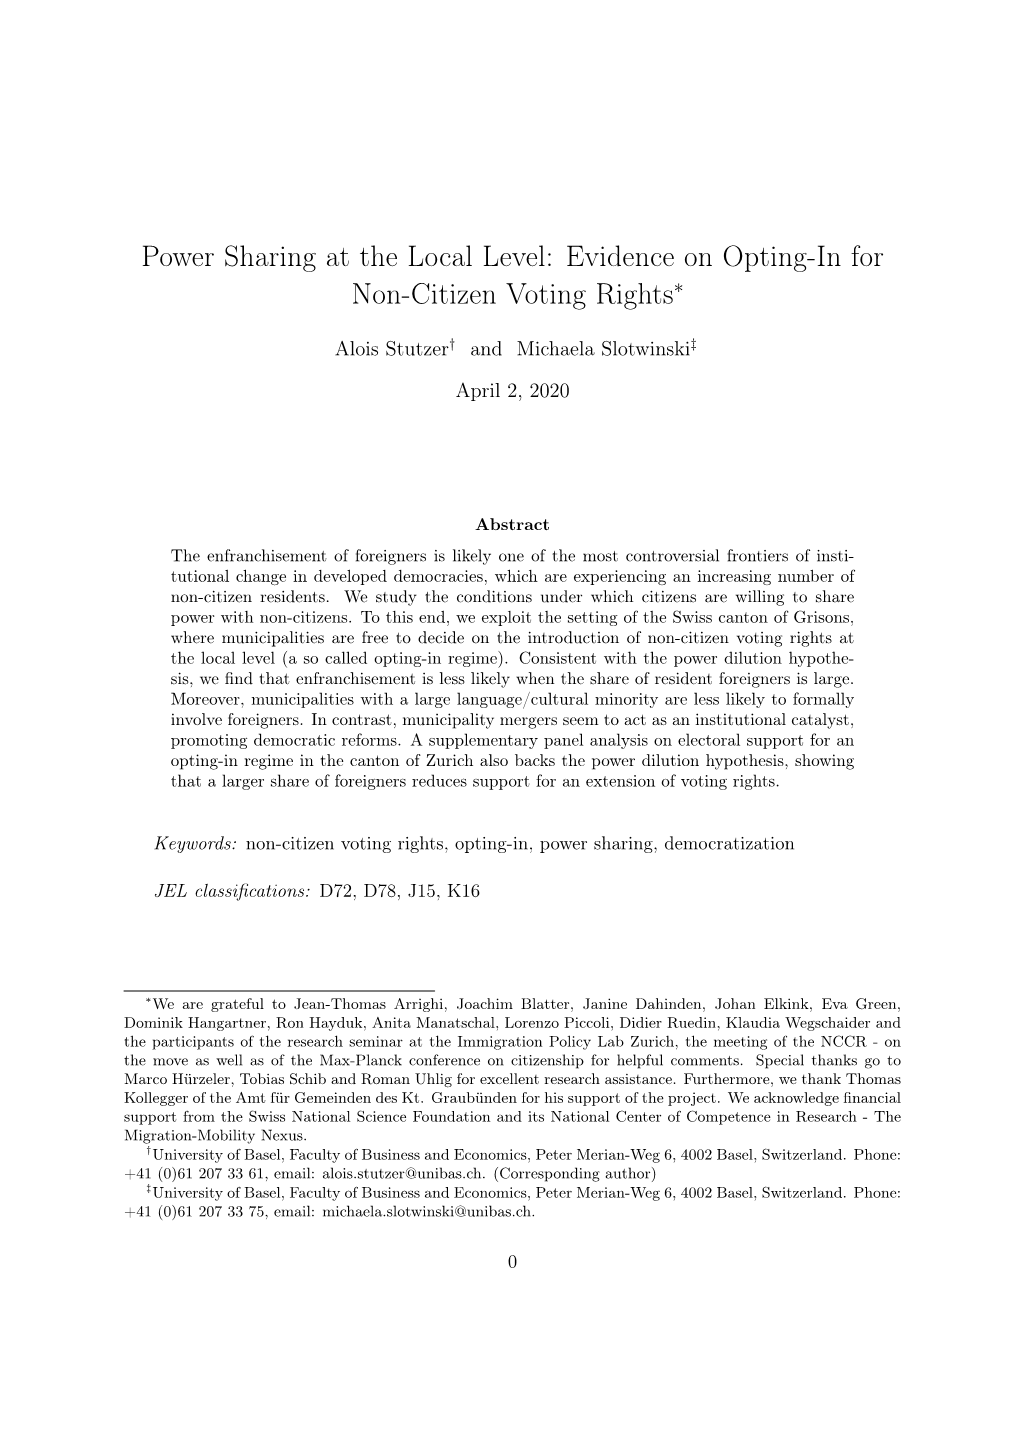 Power Sharing at the Local Level: Evidence on Opting-In for Non-Citizen Voting Rights∗